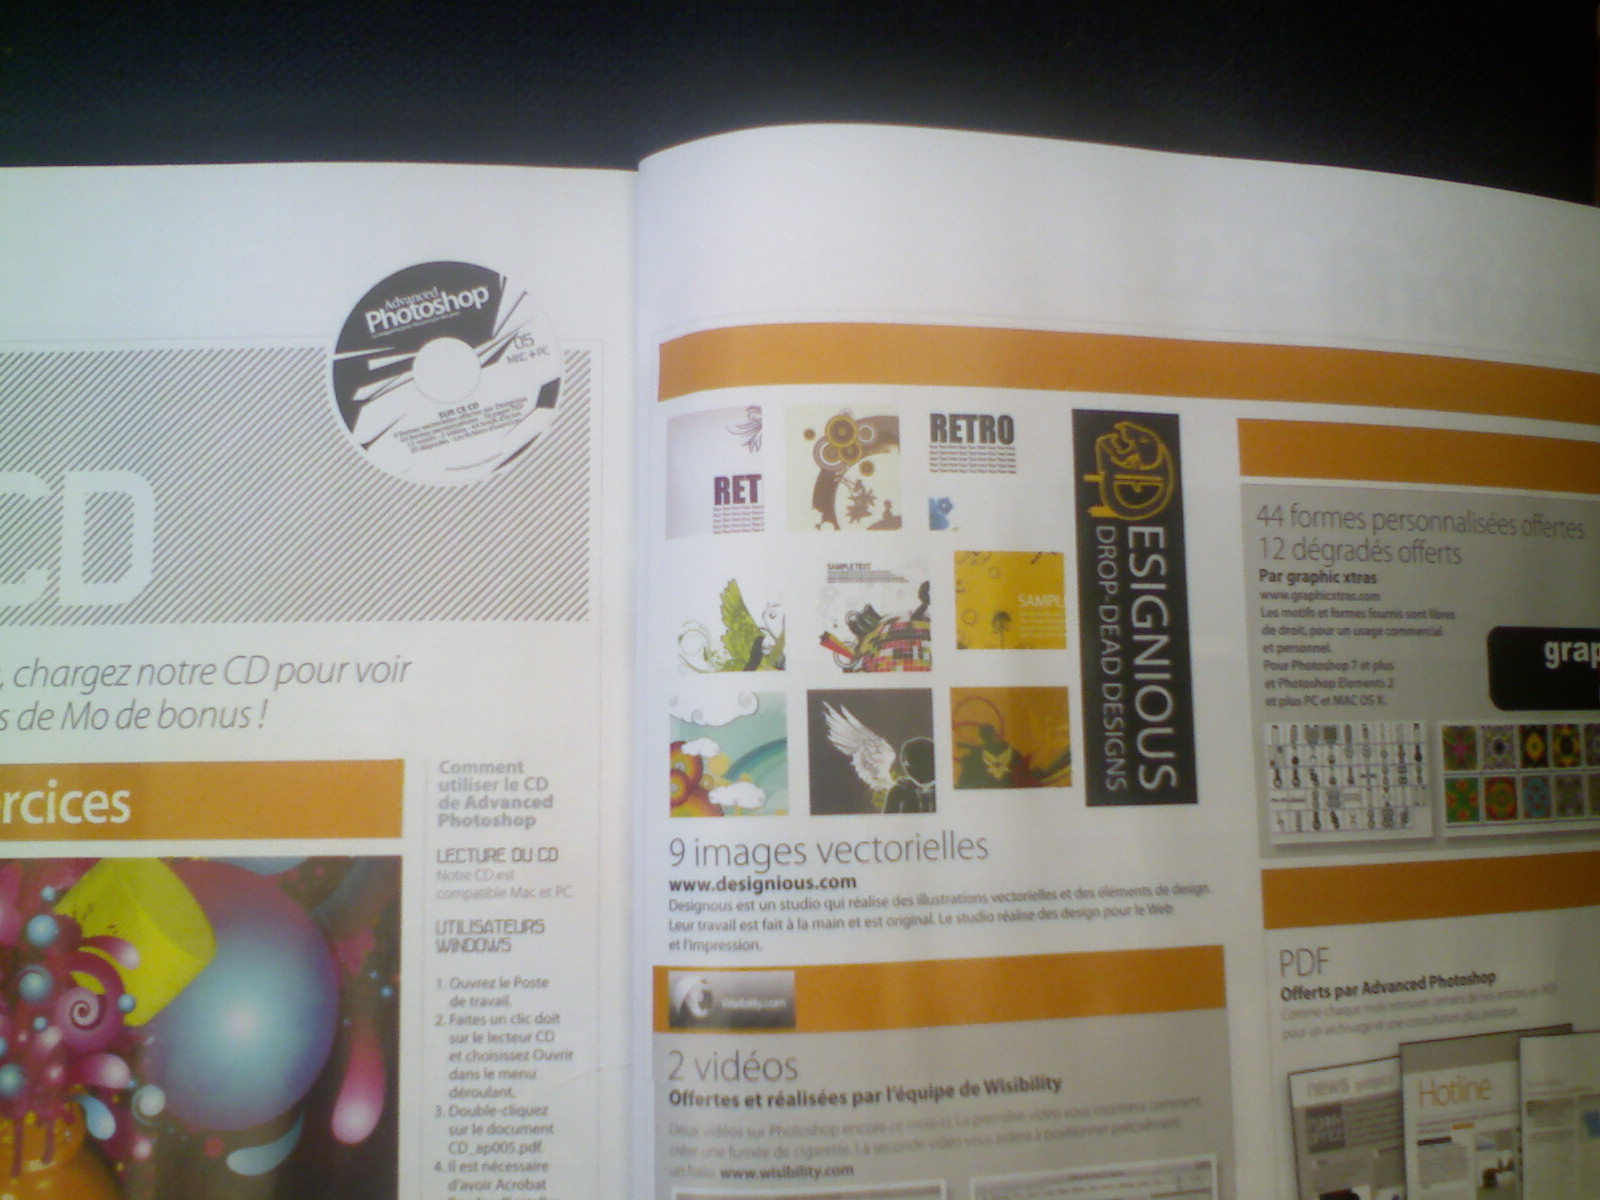 We have been published in the Advanced Photoshop Magazine